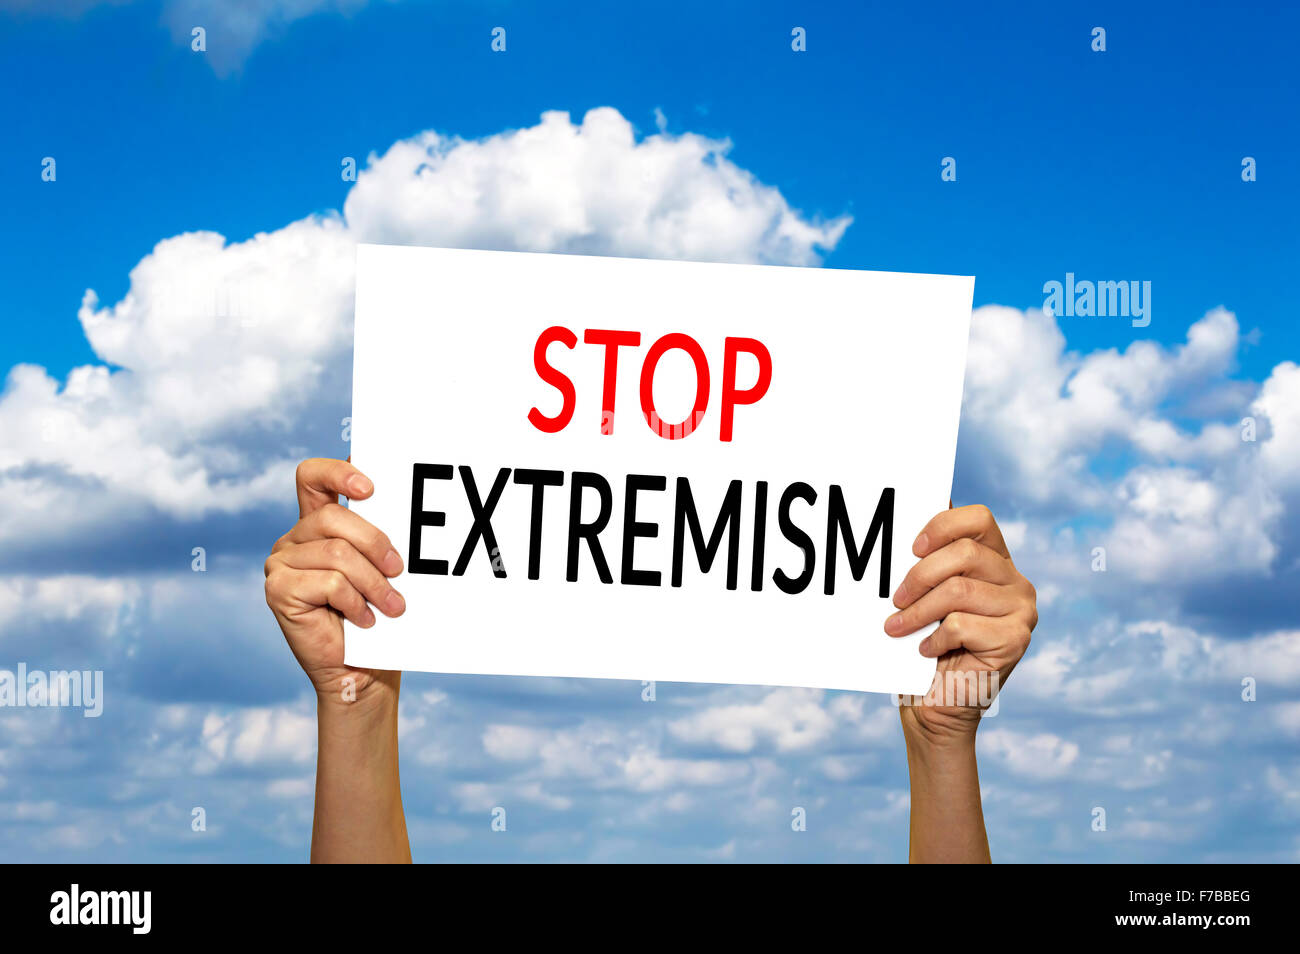 STOP EXTREMISM card in hand against blue sky with clouds. Selective focus. Stock Photo